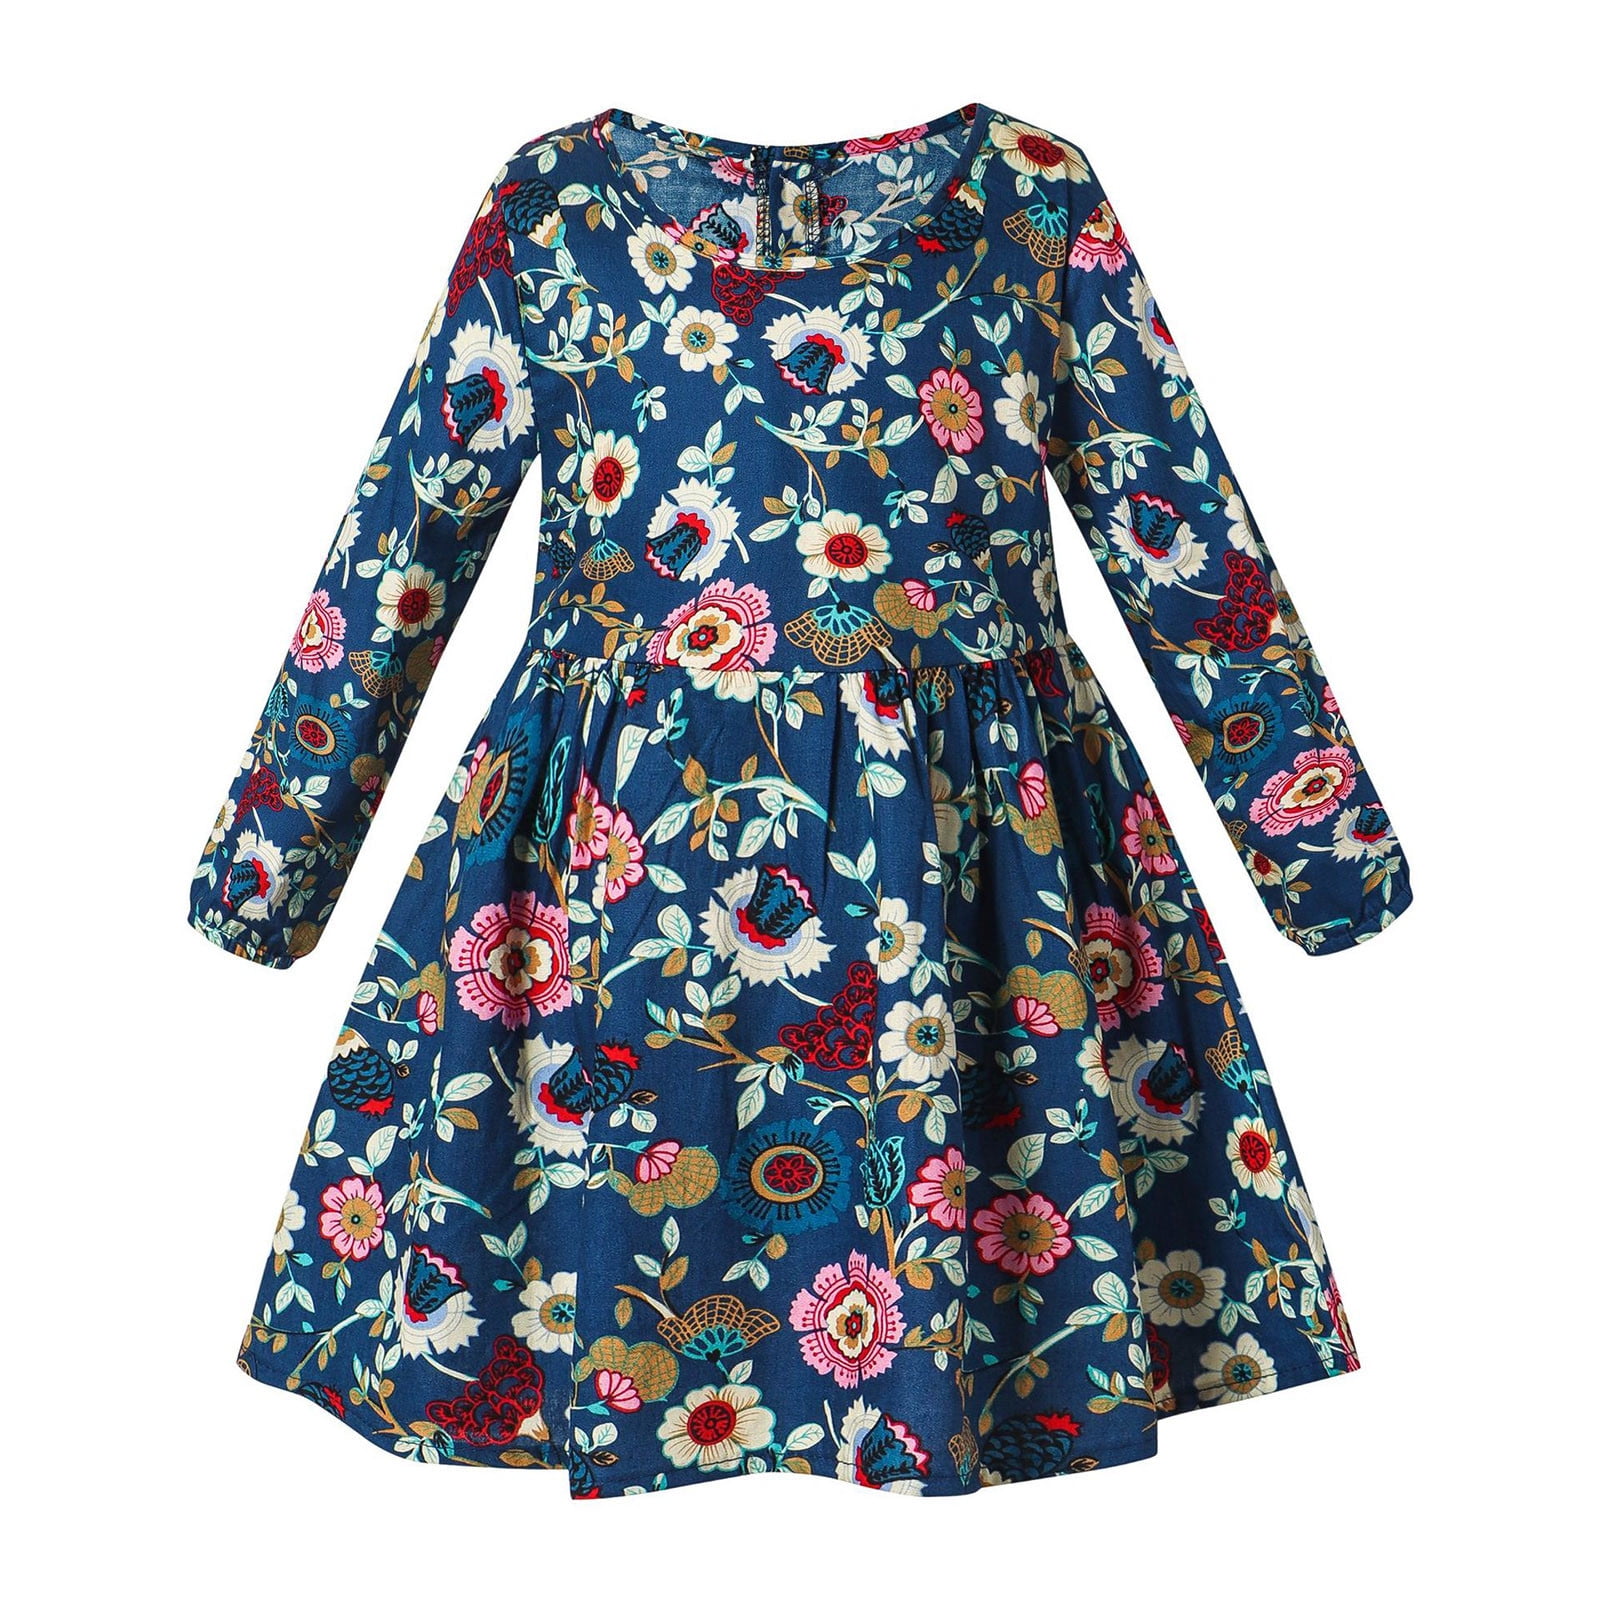 Fall Baby Girl Dresses Toddler Kids Baby Girls Floral Print Casual A ...